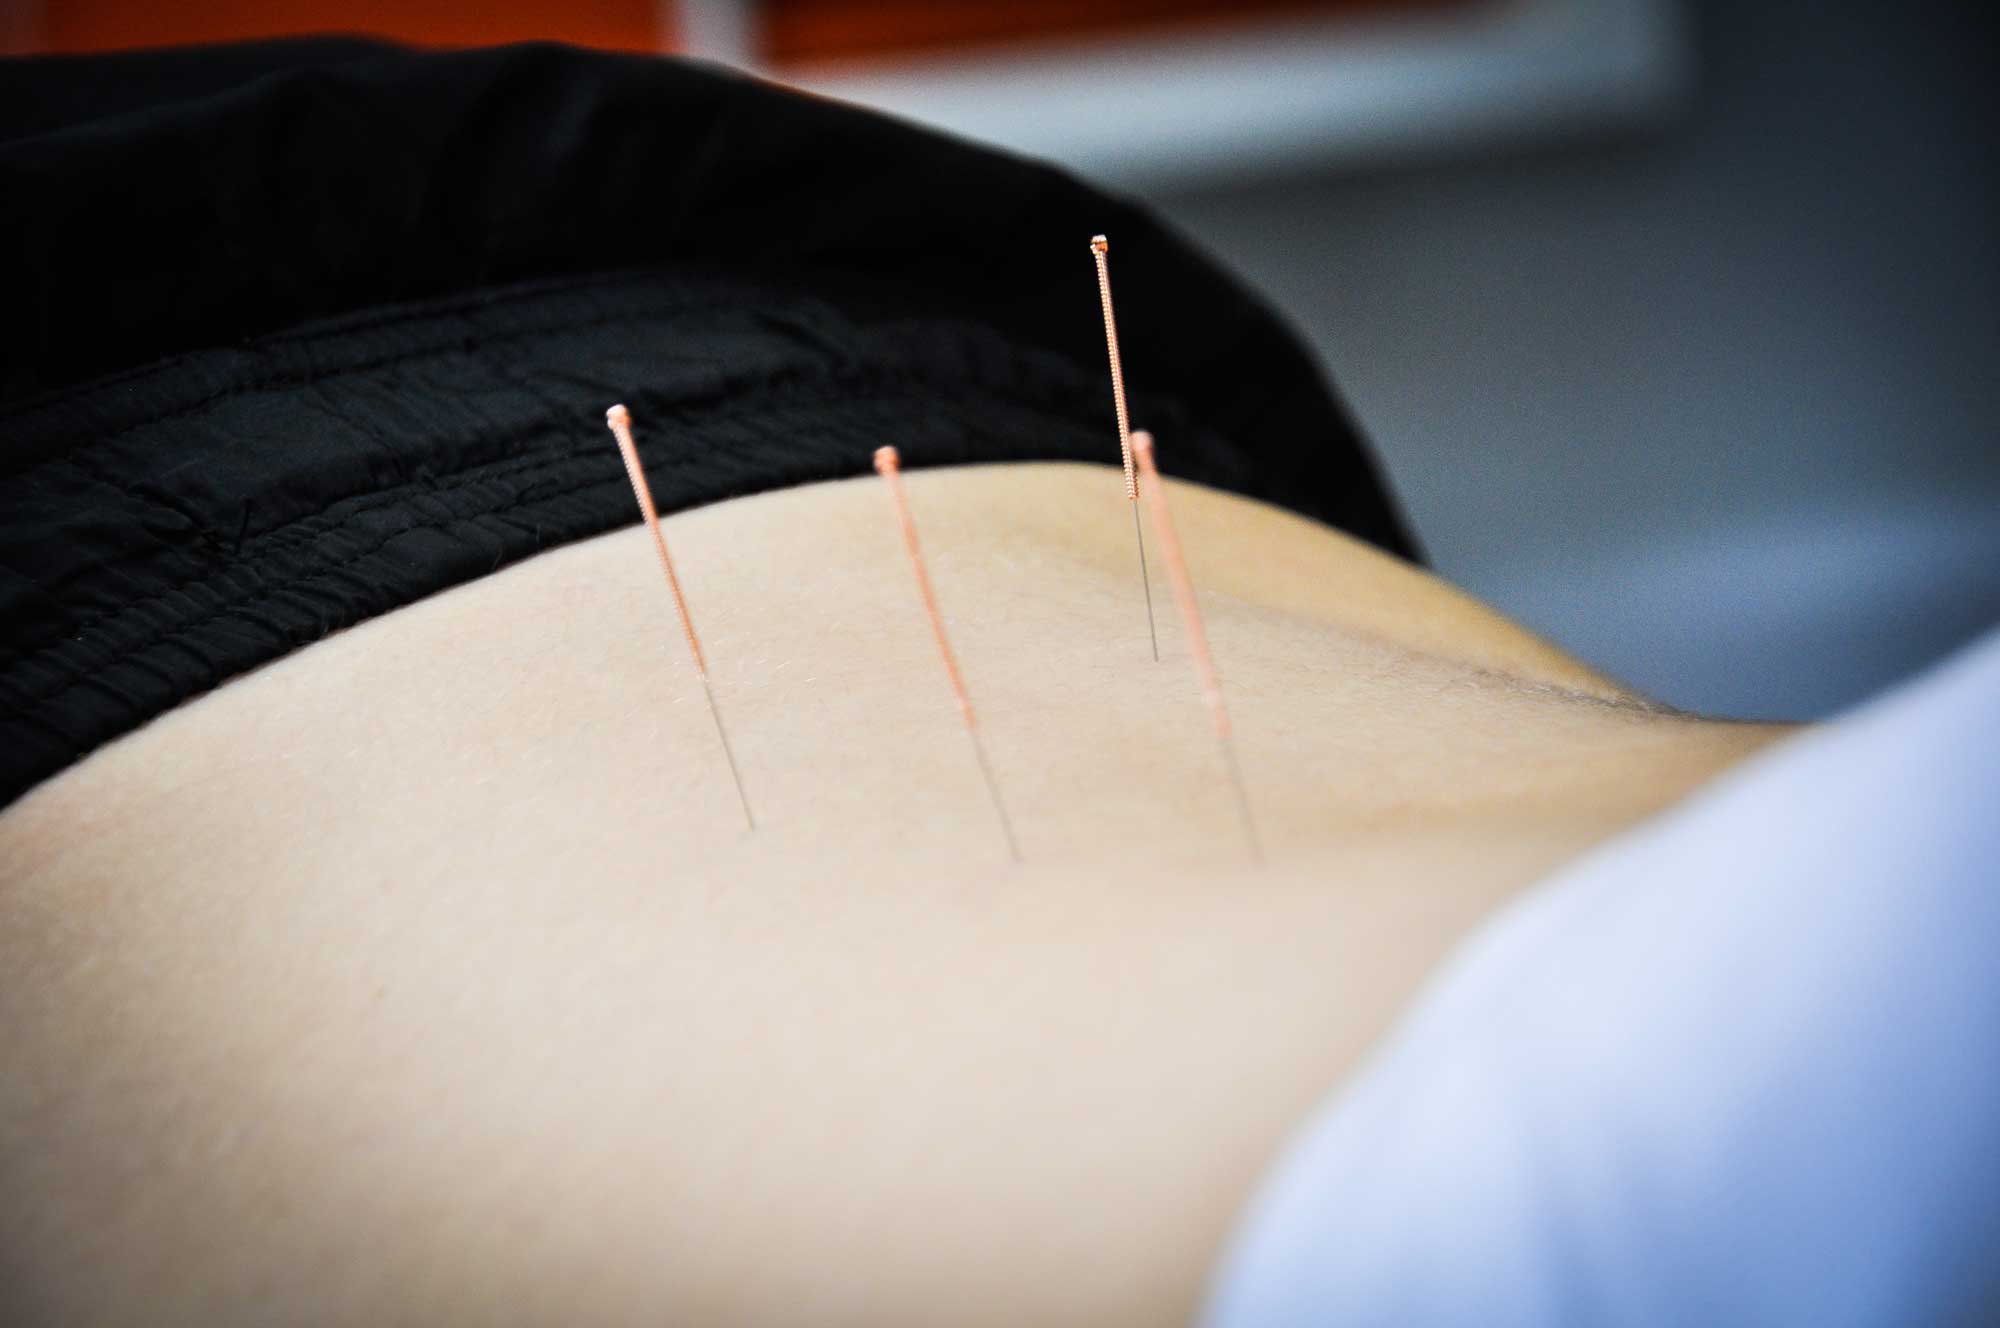 Square One - Acupuncture: Image showing acupuncture needles in the back back of patient